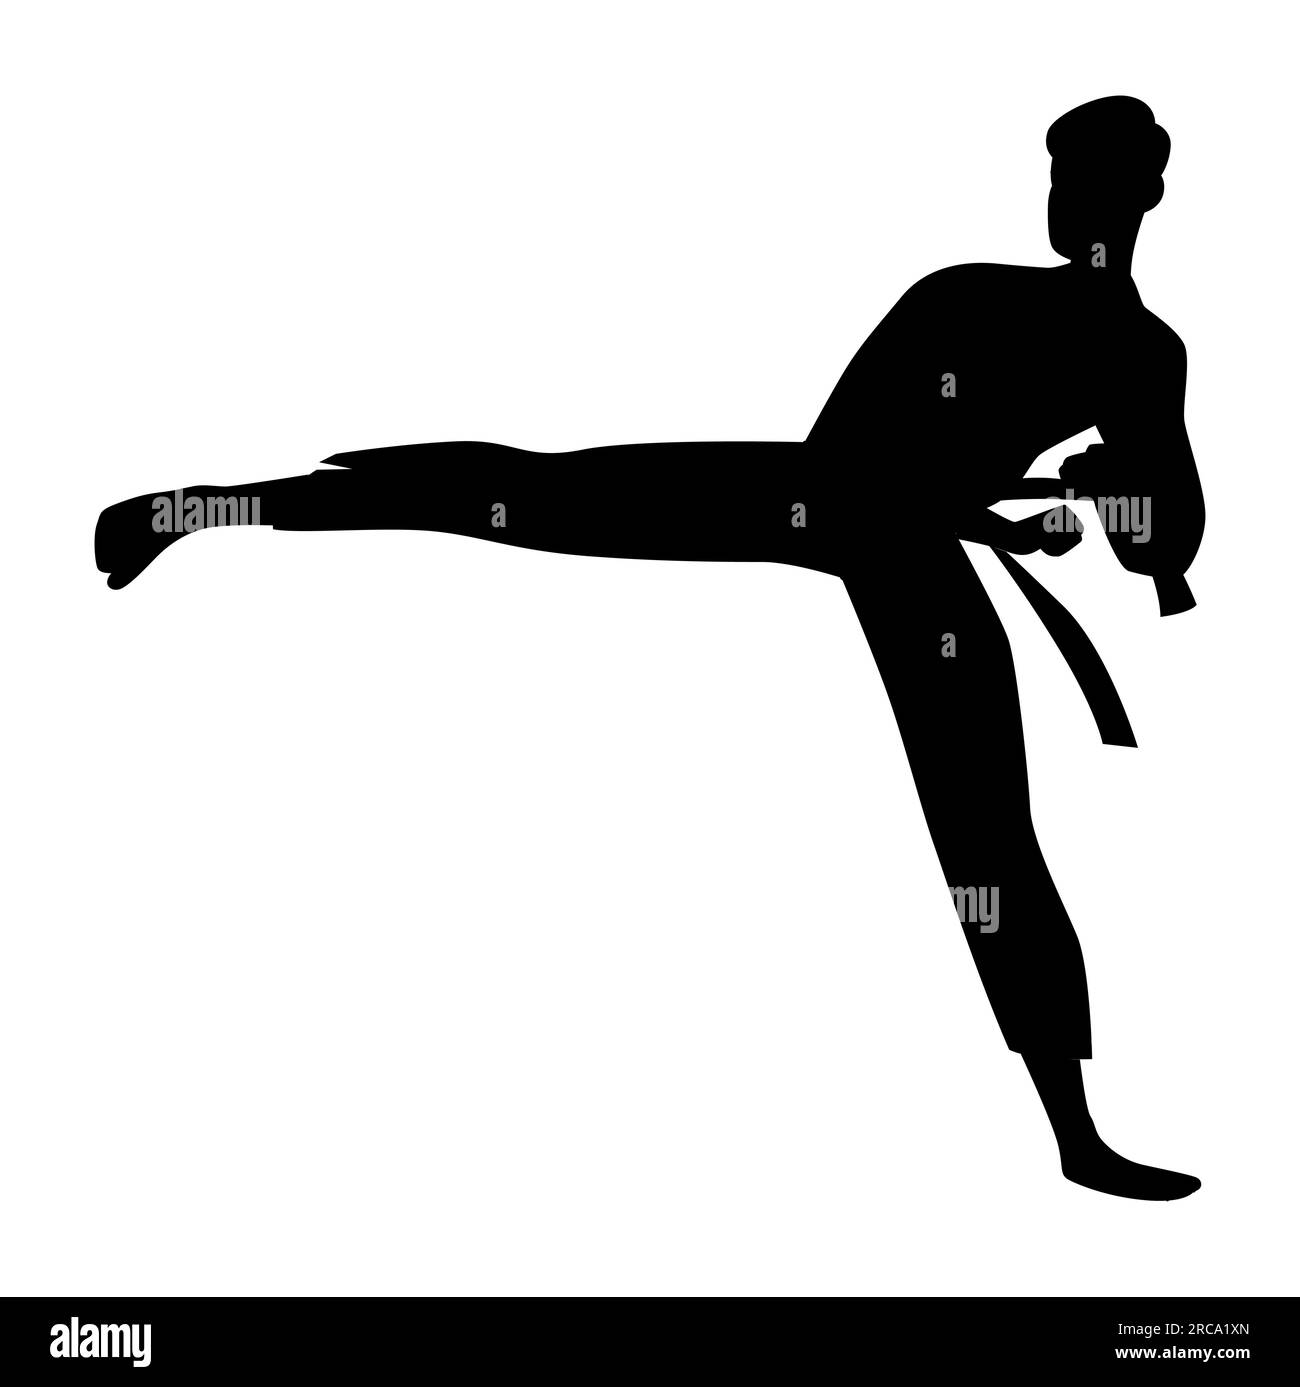 Black silhouette of a person doing karate practice in a kicking pose, martial arts class, vector illustration isolated on white background Stock Vector